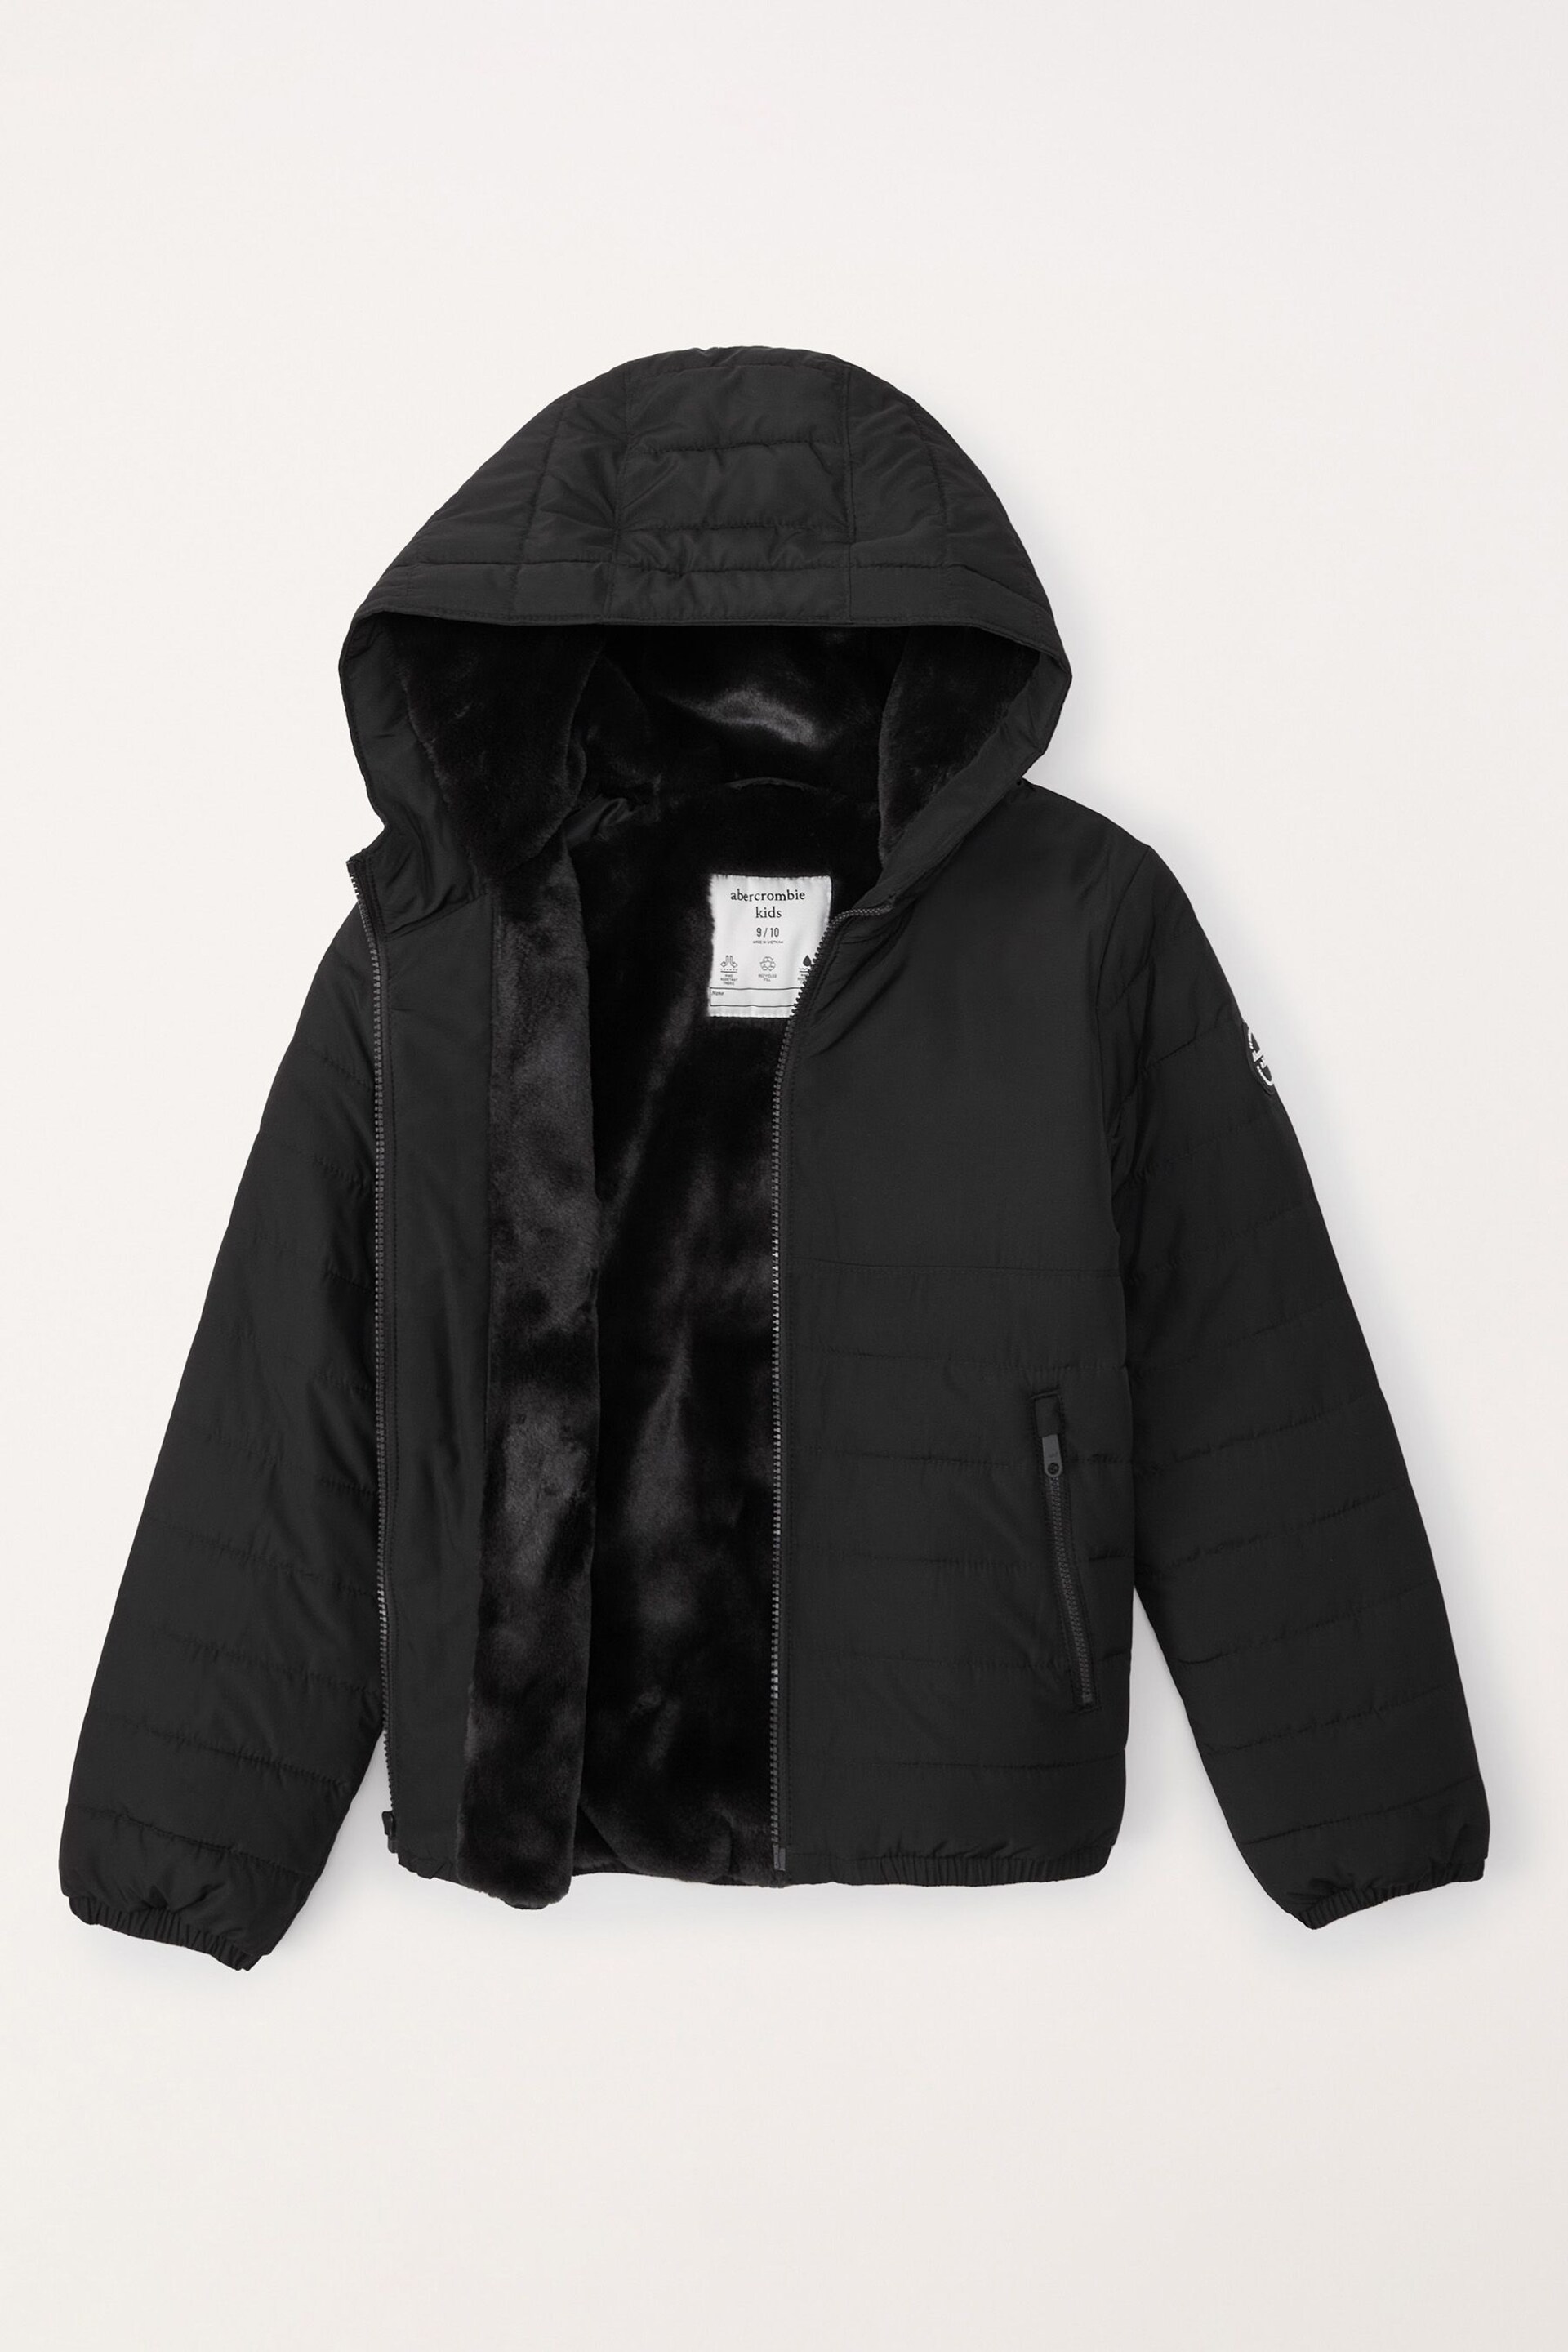 Abercrombie & Fitch Puffer Jacket Black Coat - Image 2 of 6